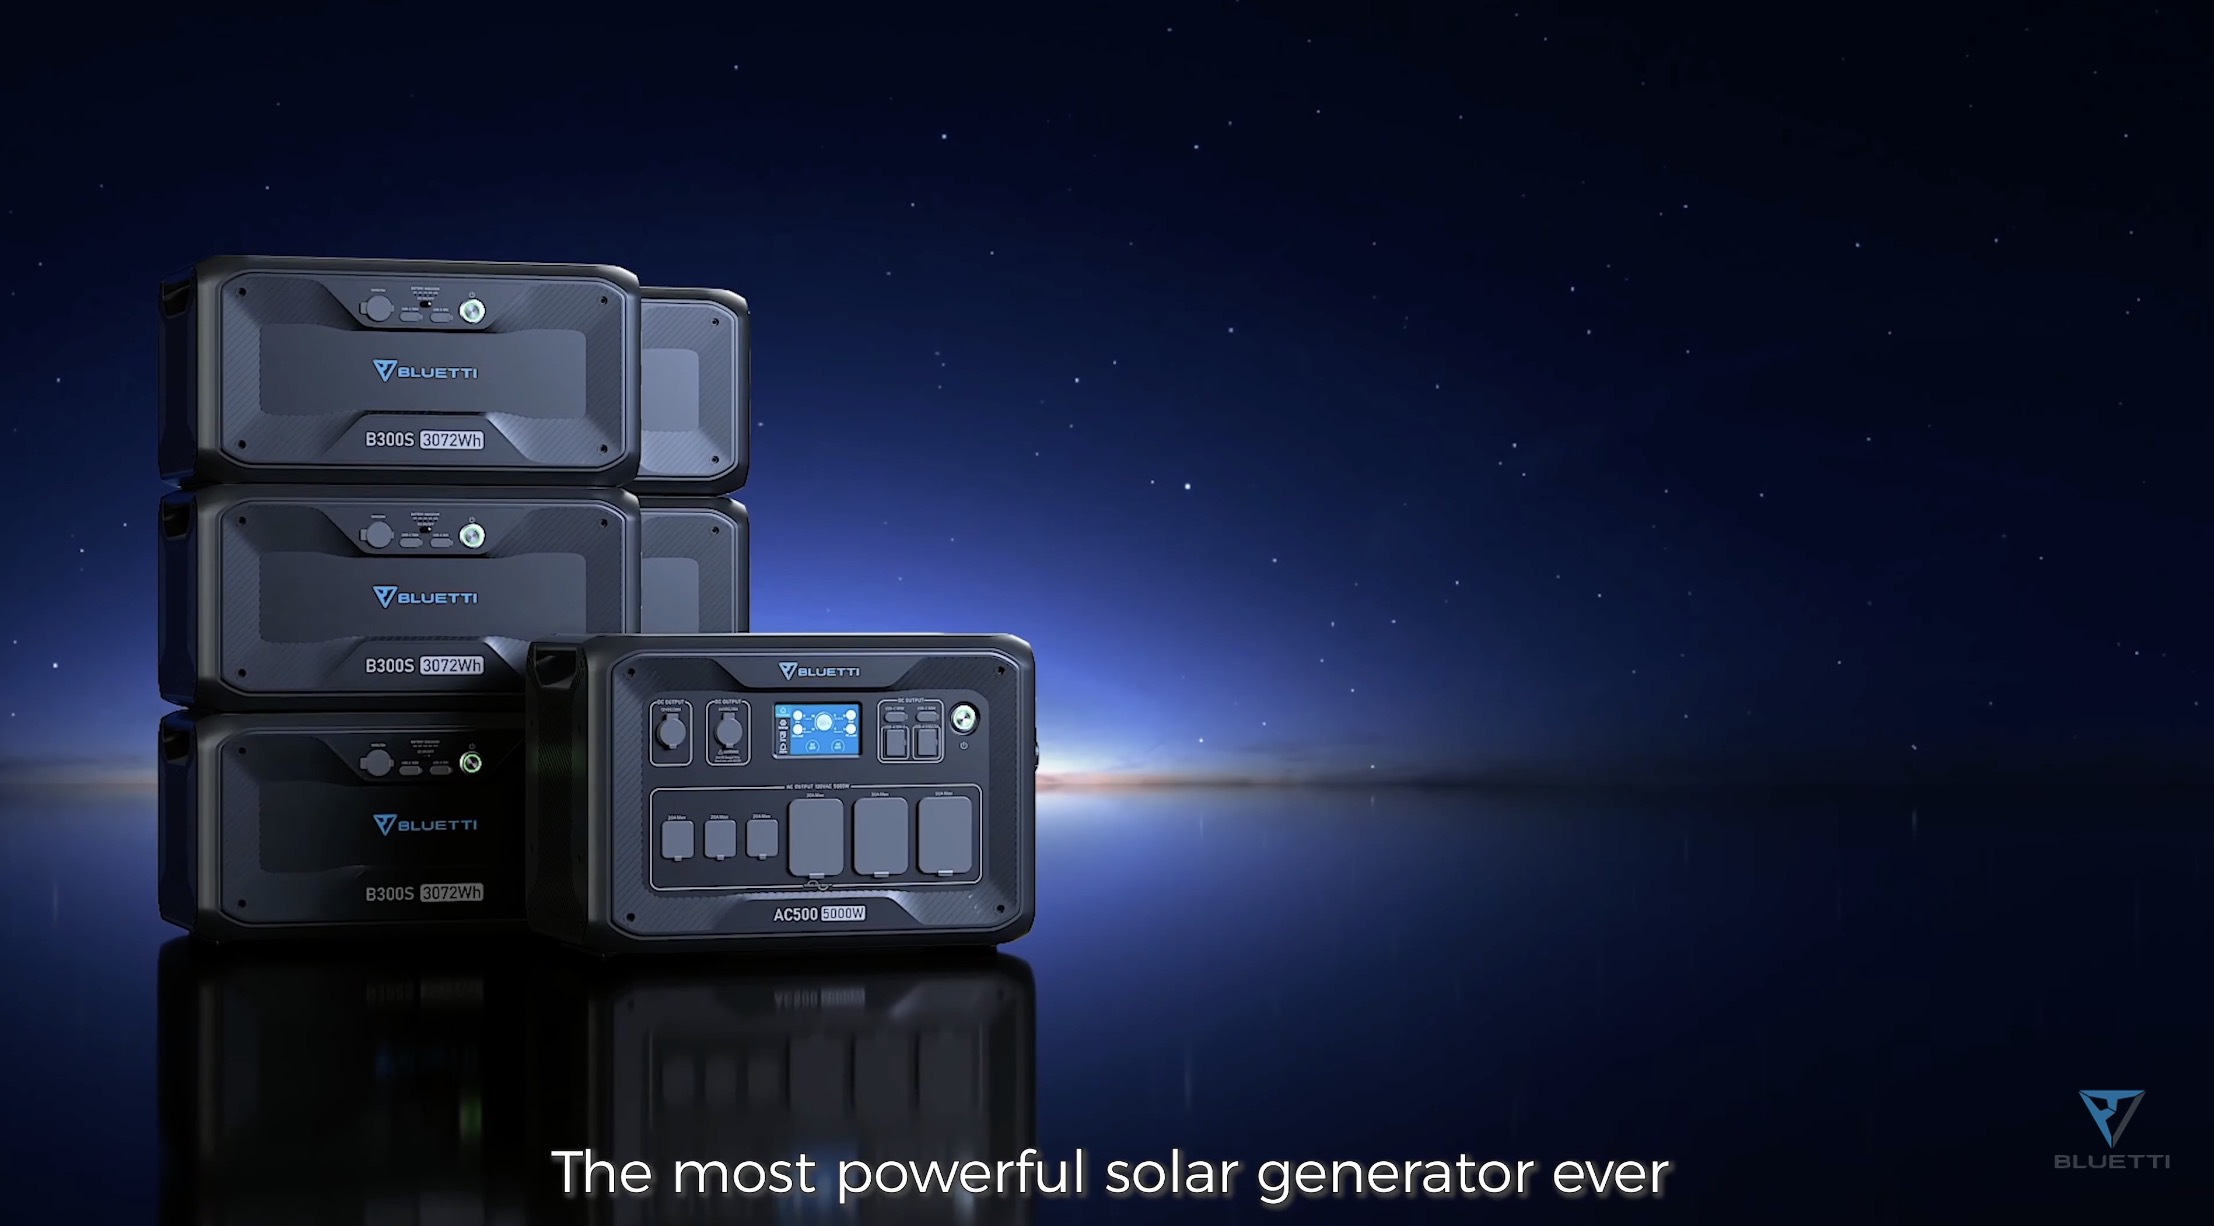 Bluetti's sale is best time to get a backup power station